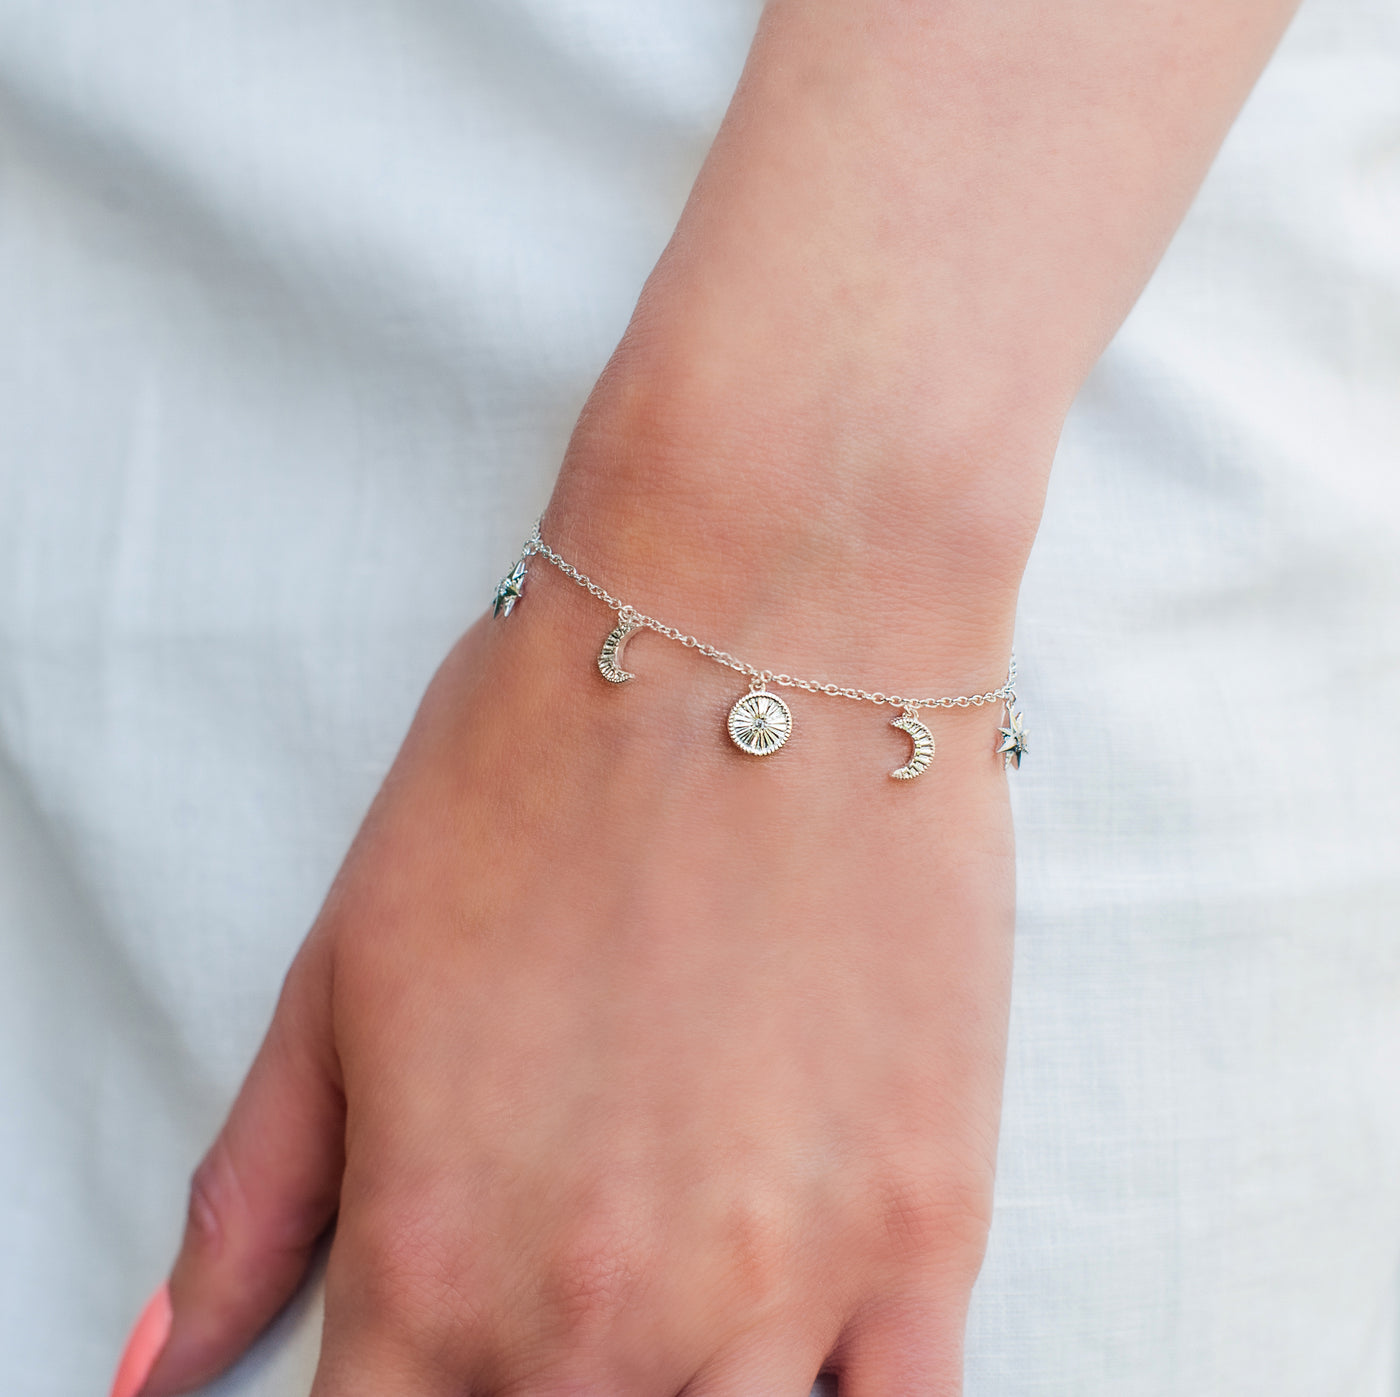 Model wearing sterling Silver moon and star charm bracelet with CZ crystals